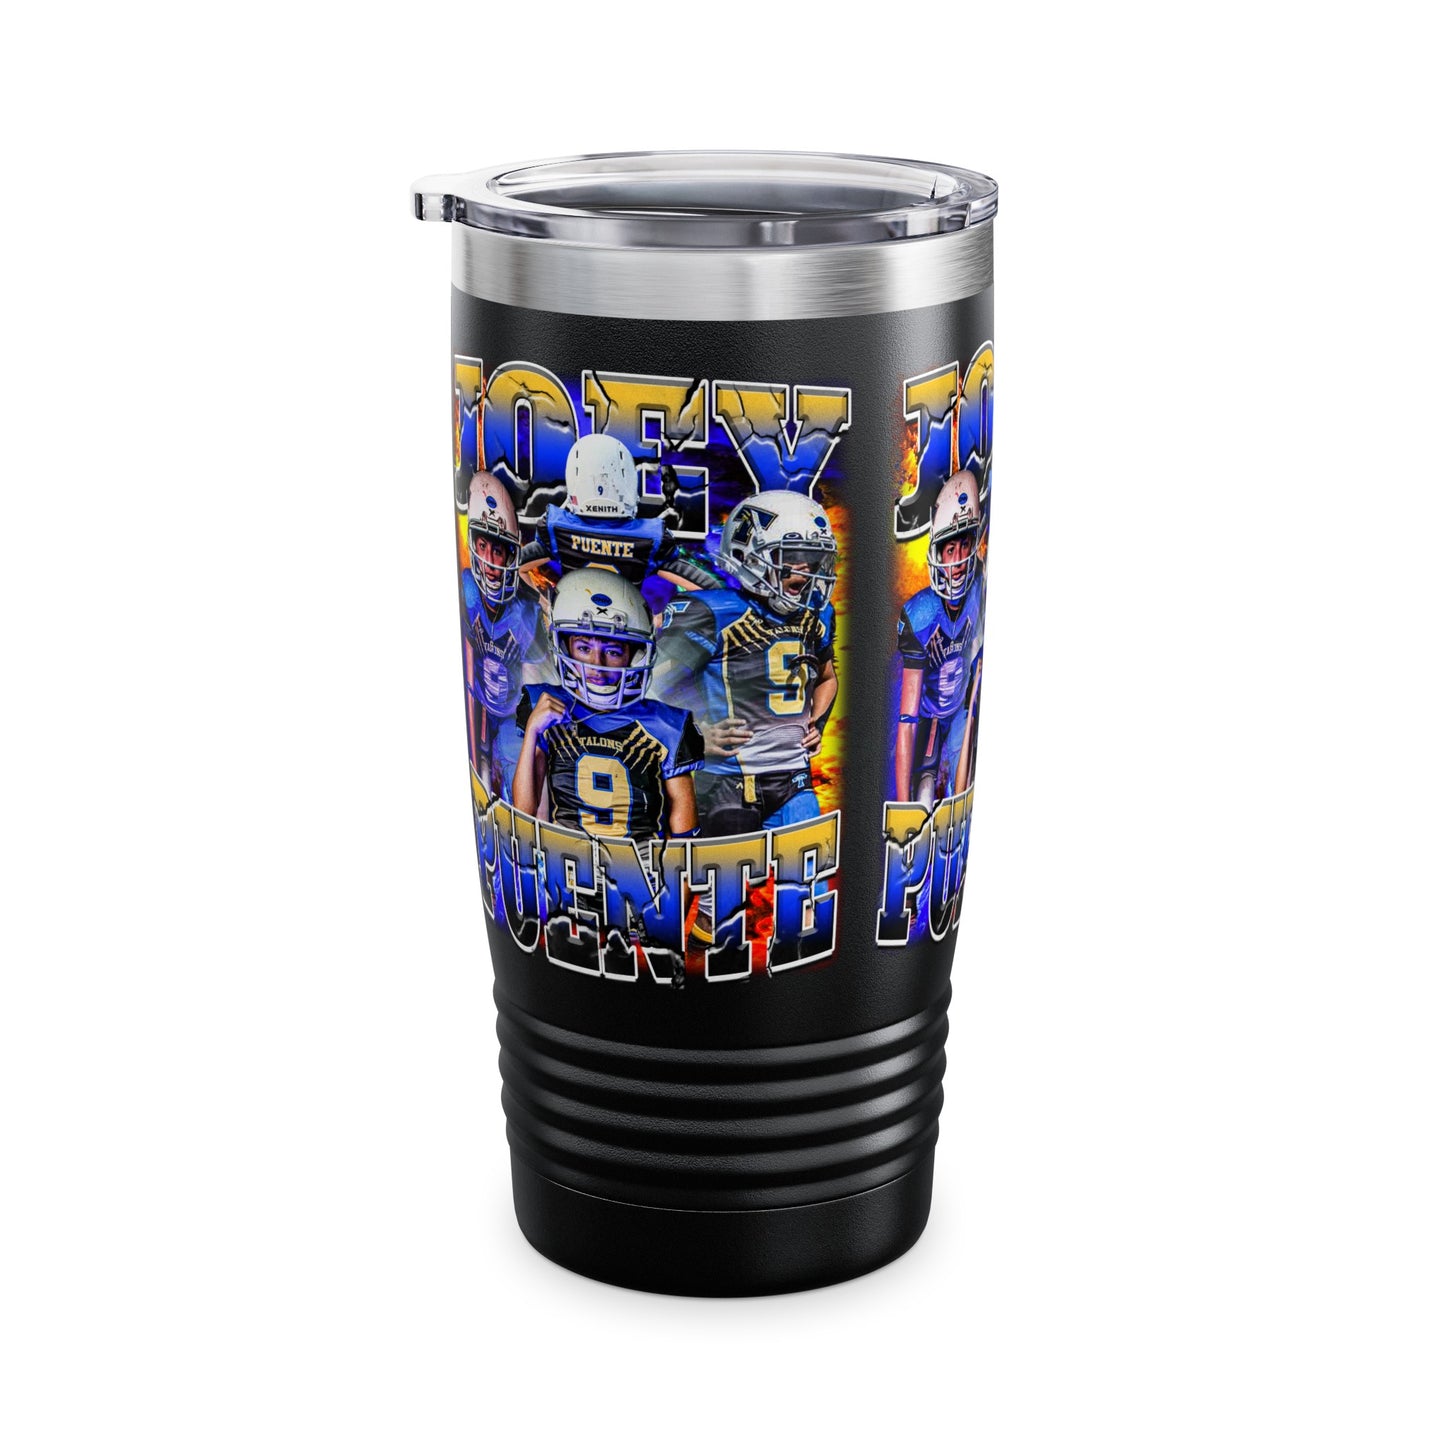 Joey Puente Stainless Steal Tumbler